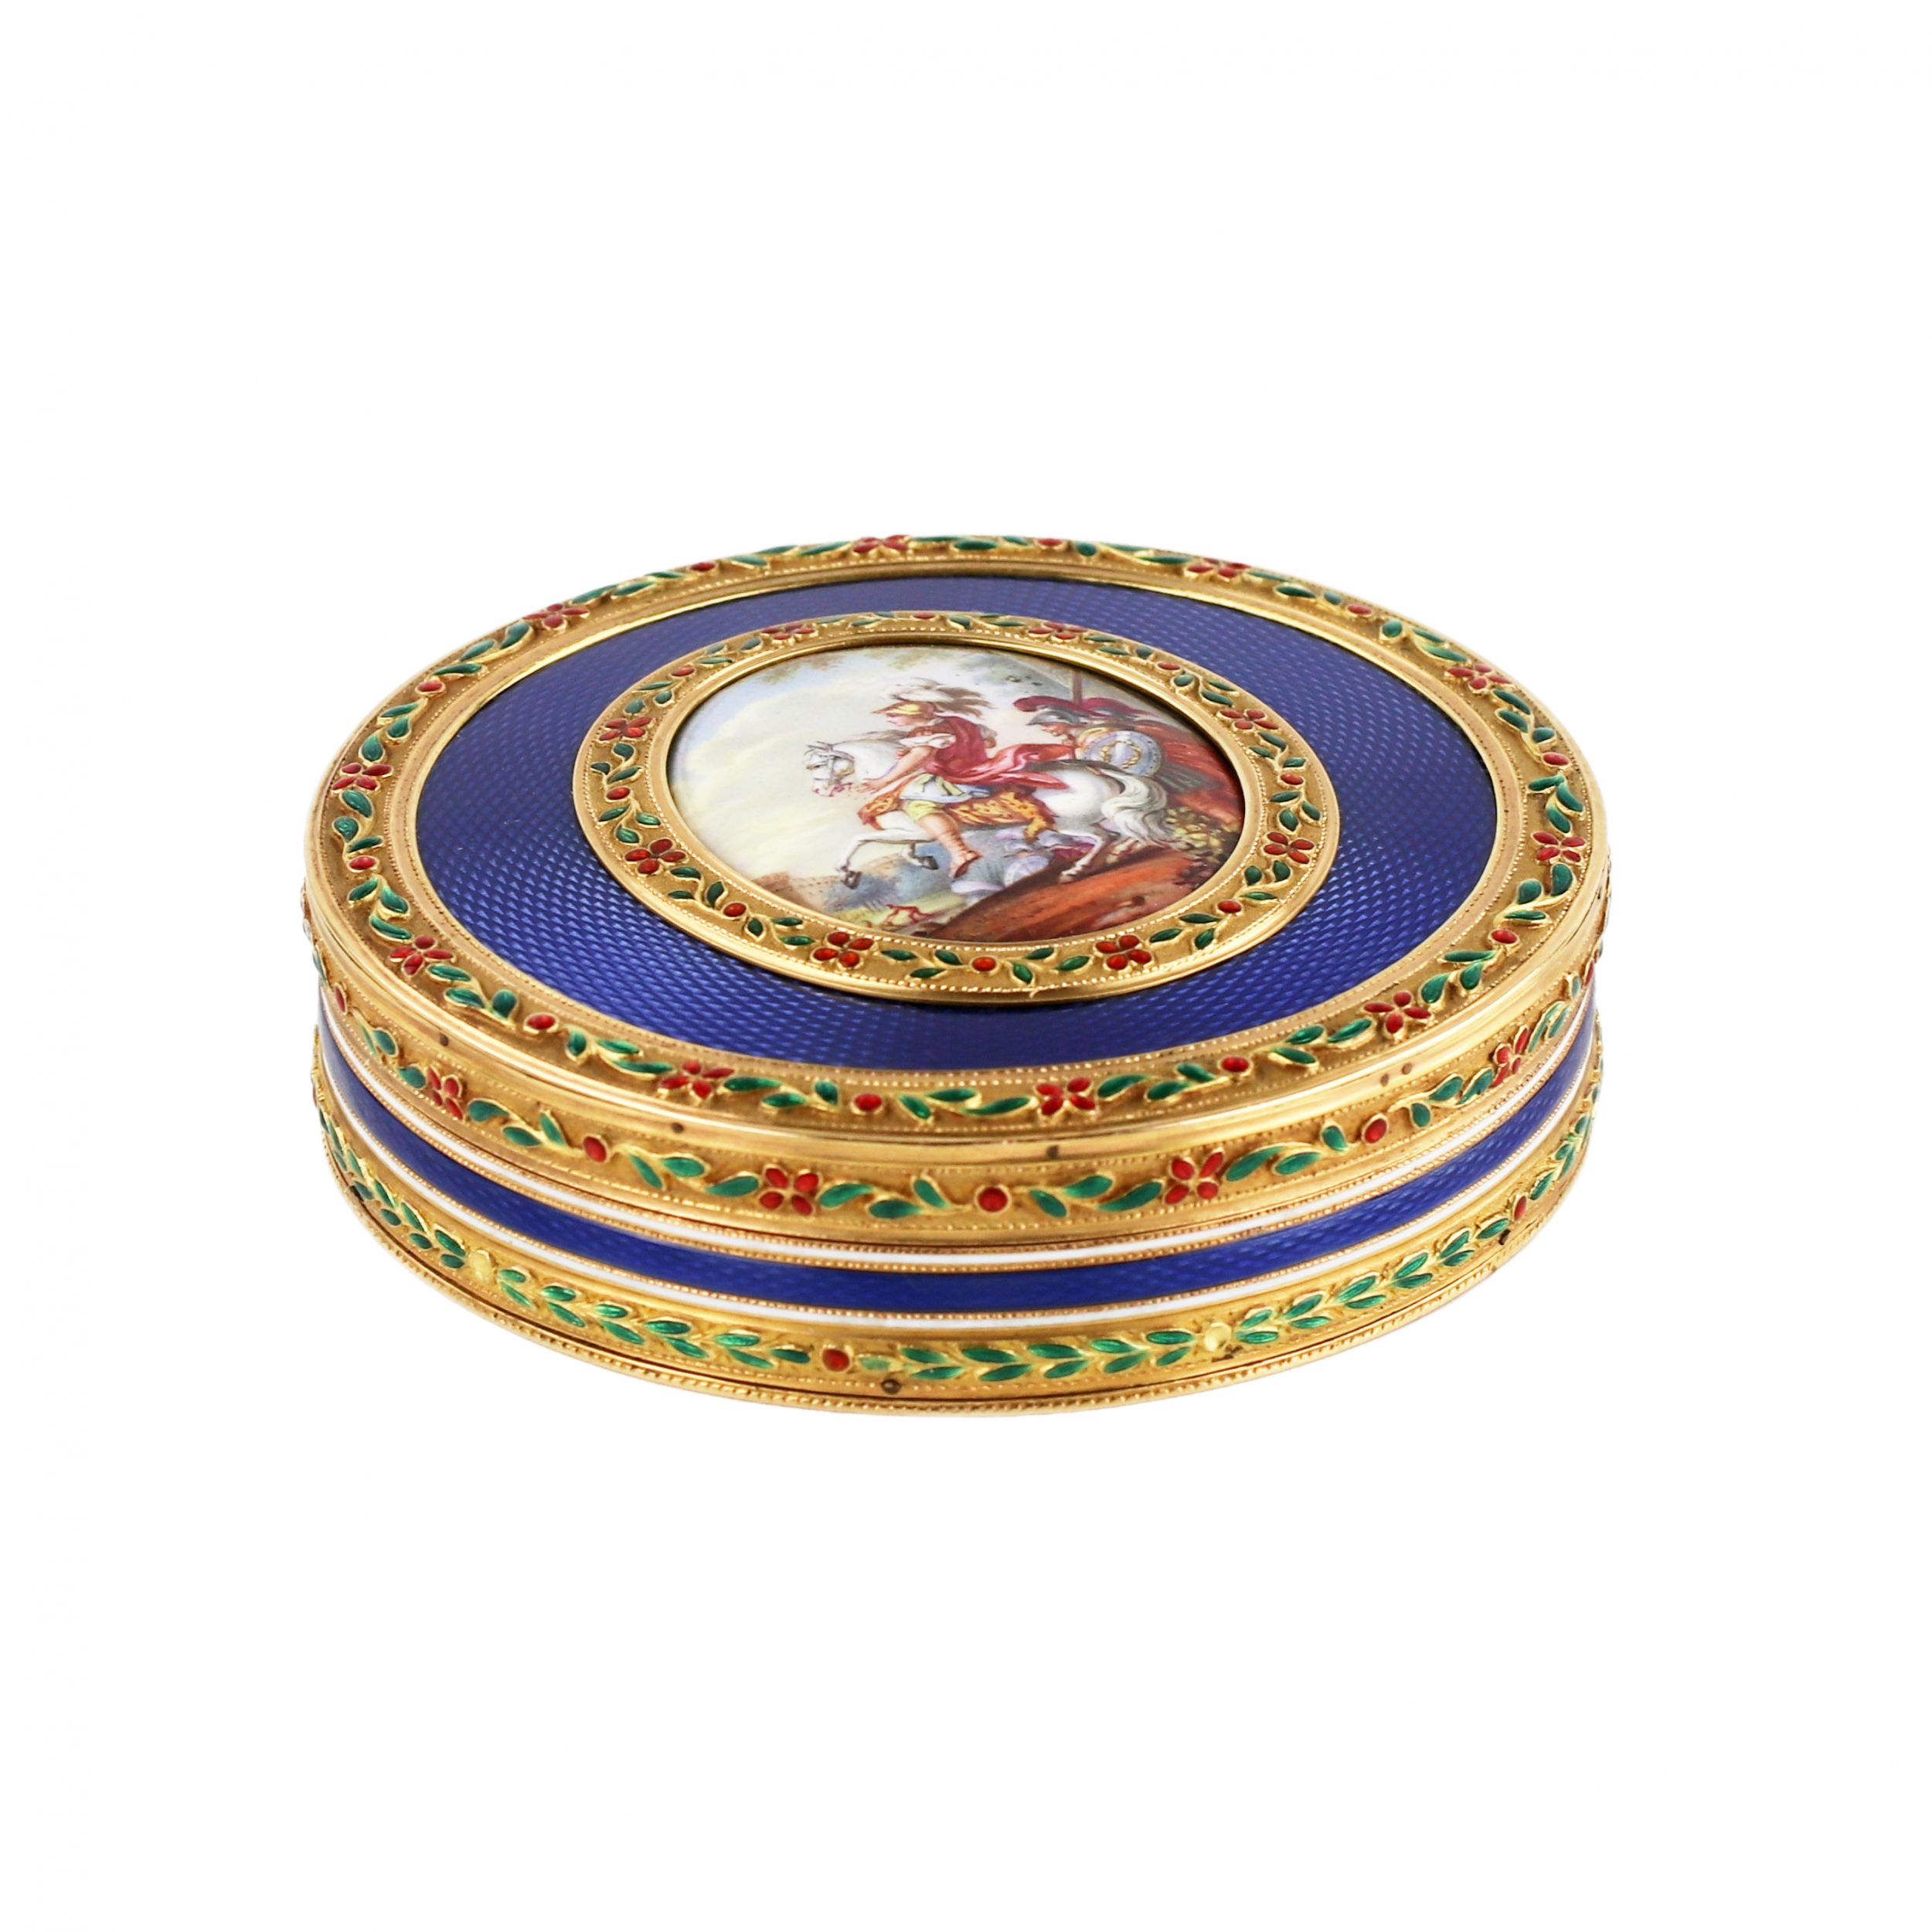 French-gilded-snuffbox-of-the-late-18th-century-with-enamel-decoration-and-painting-